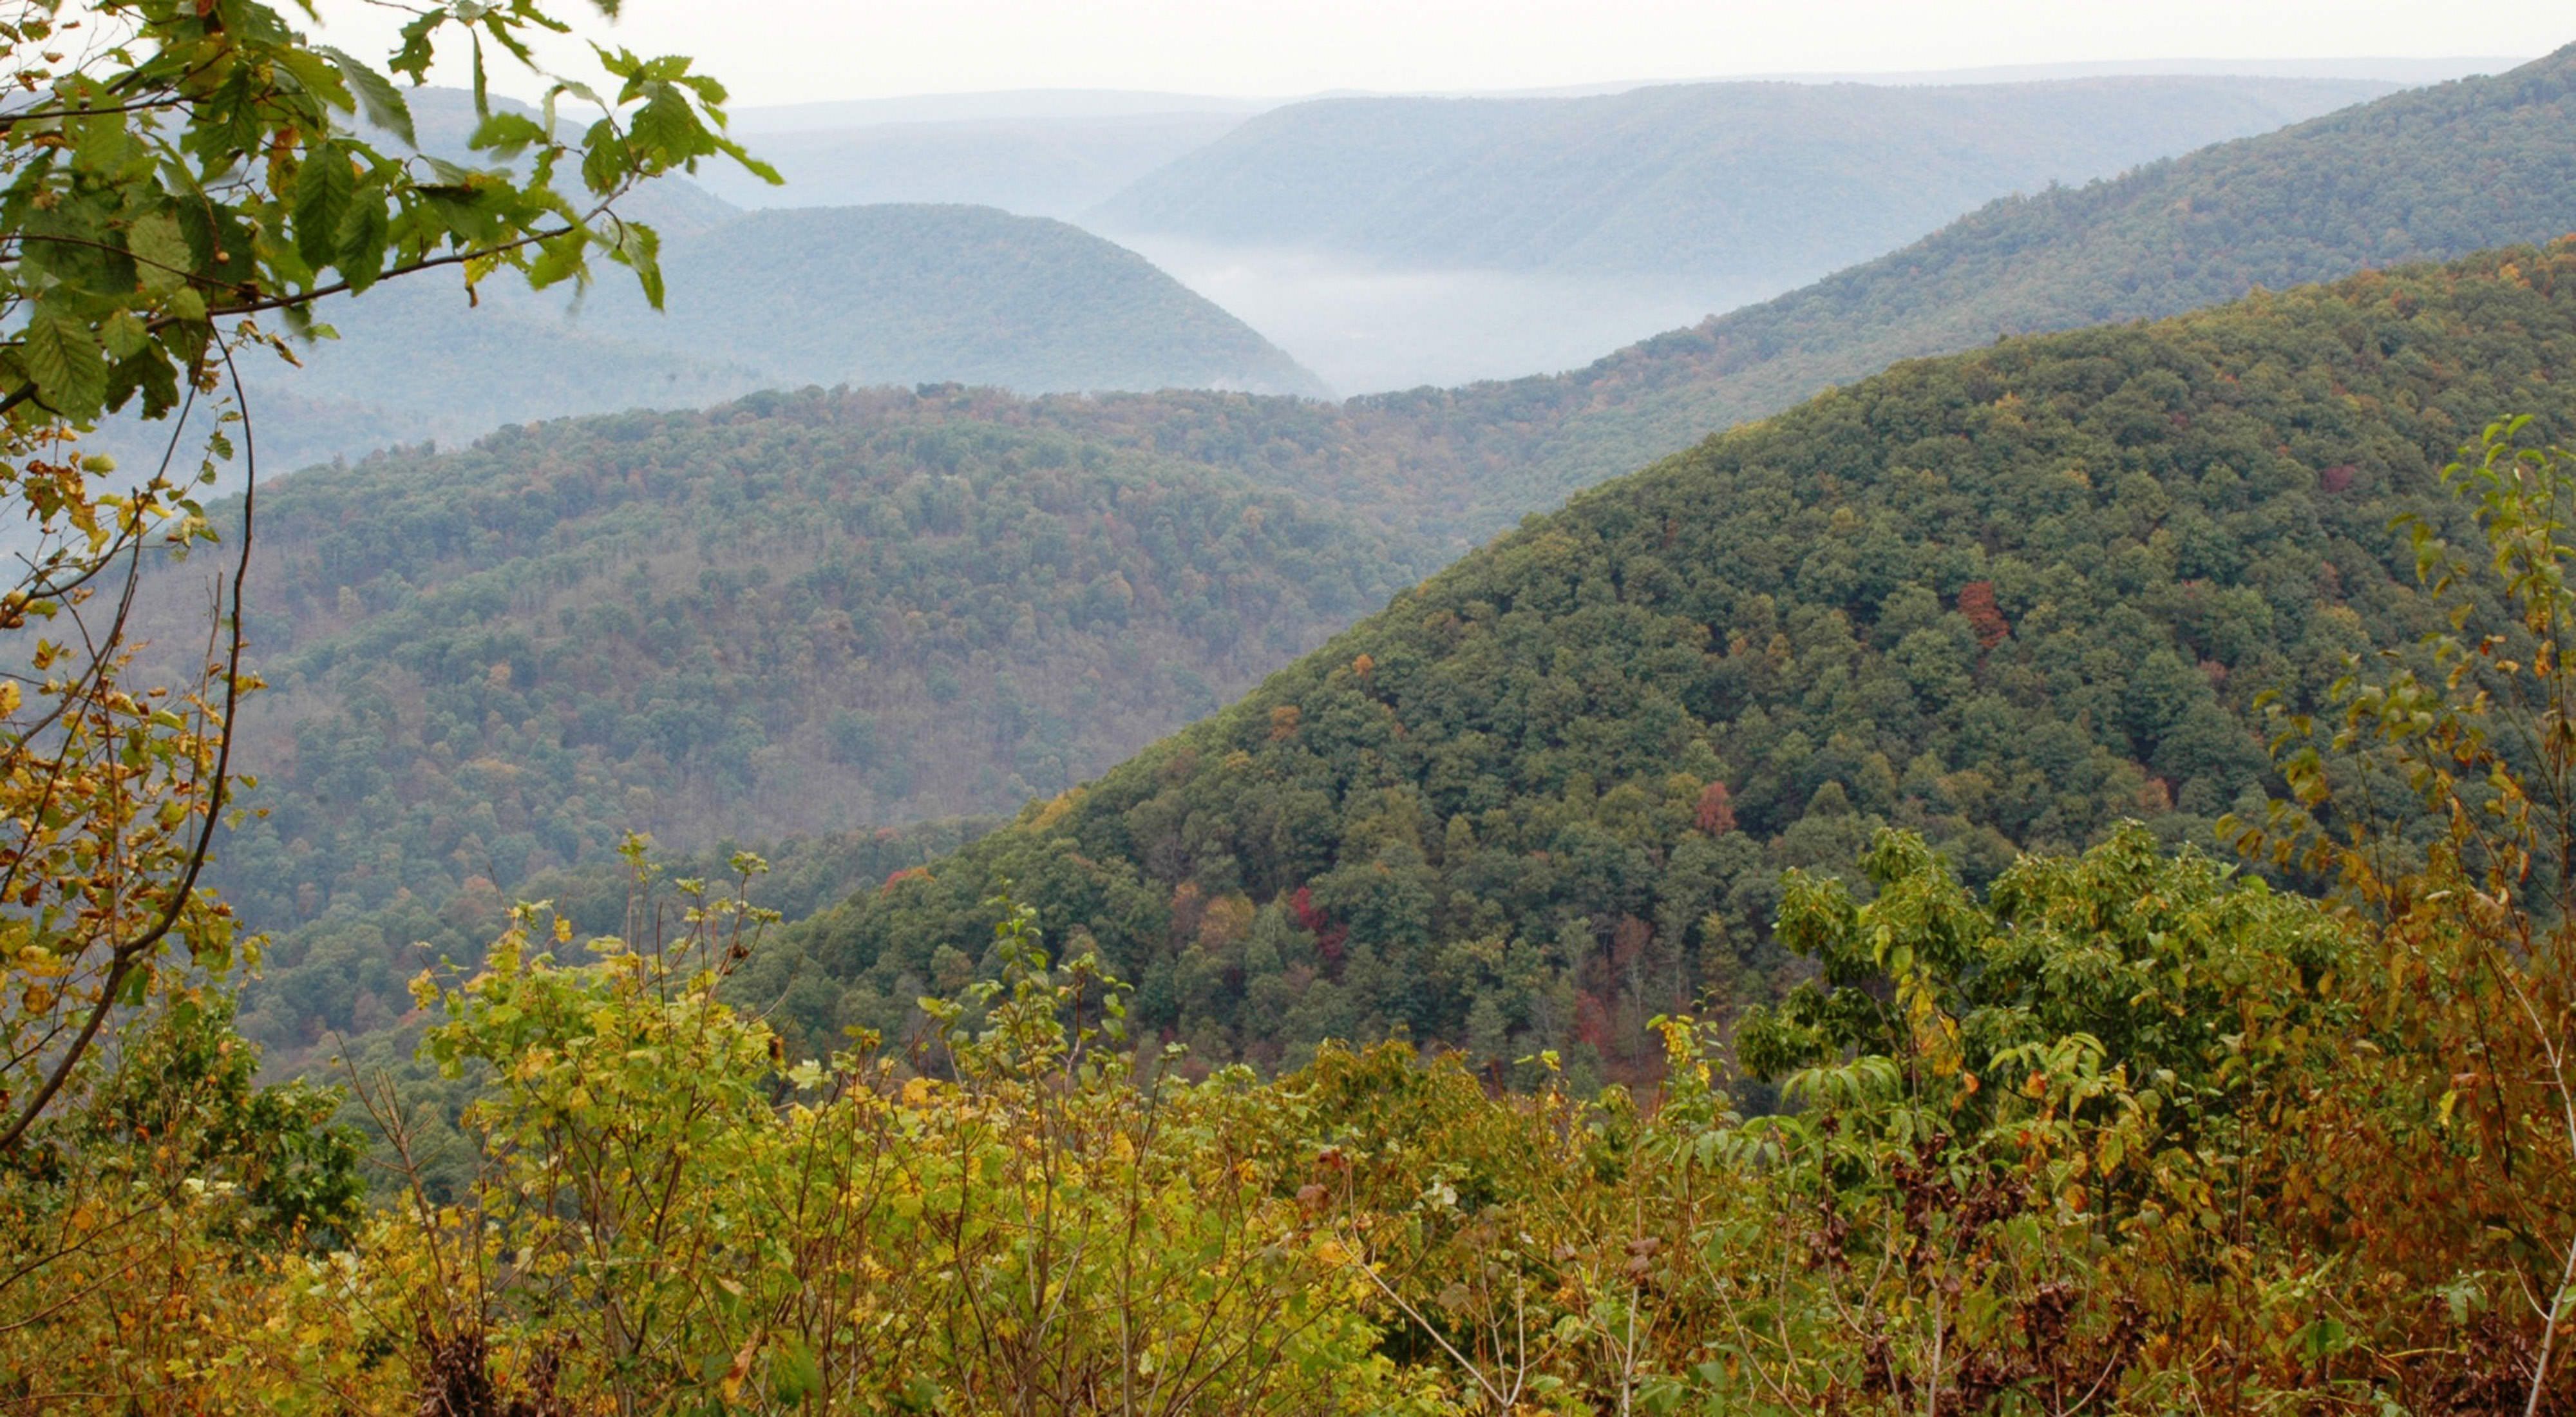 Rolling mountain ridges extend to the horizon blanketed in mist. In the foreground, leaves are just beginning to show fall color. In the background, heavy fog sits in a deep valley.